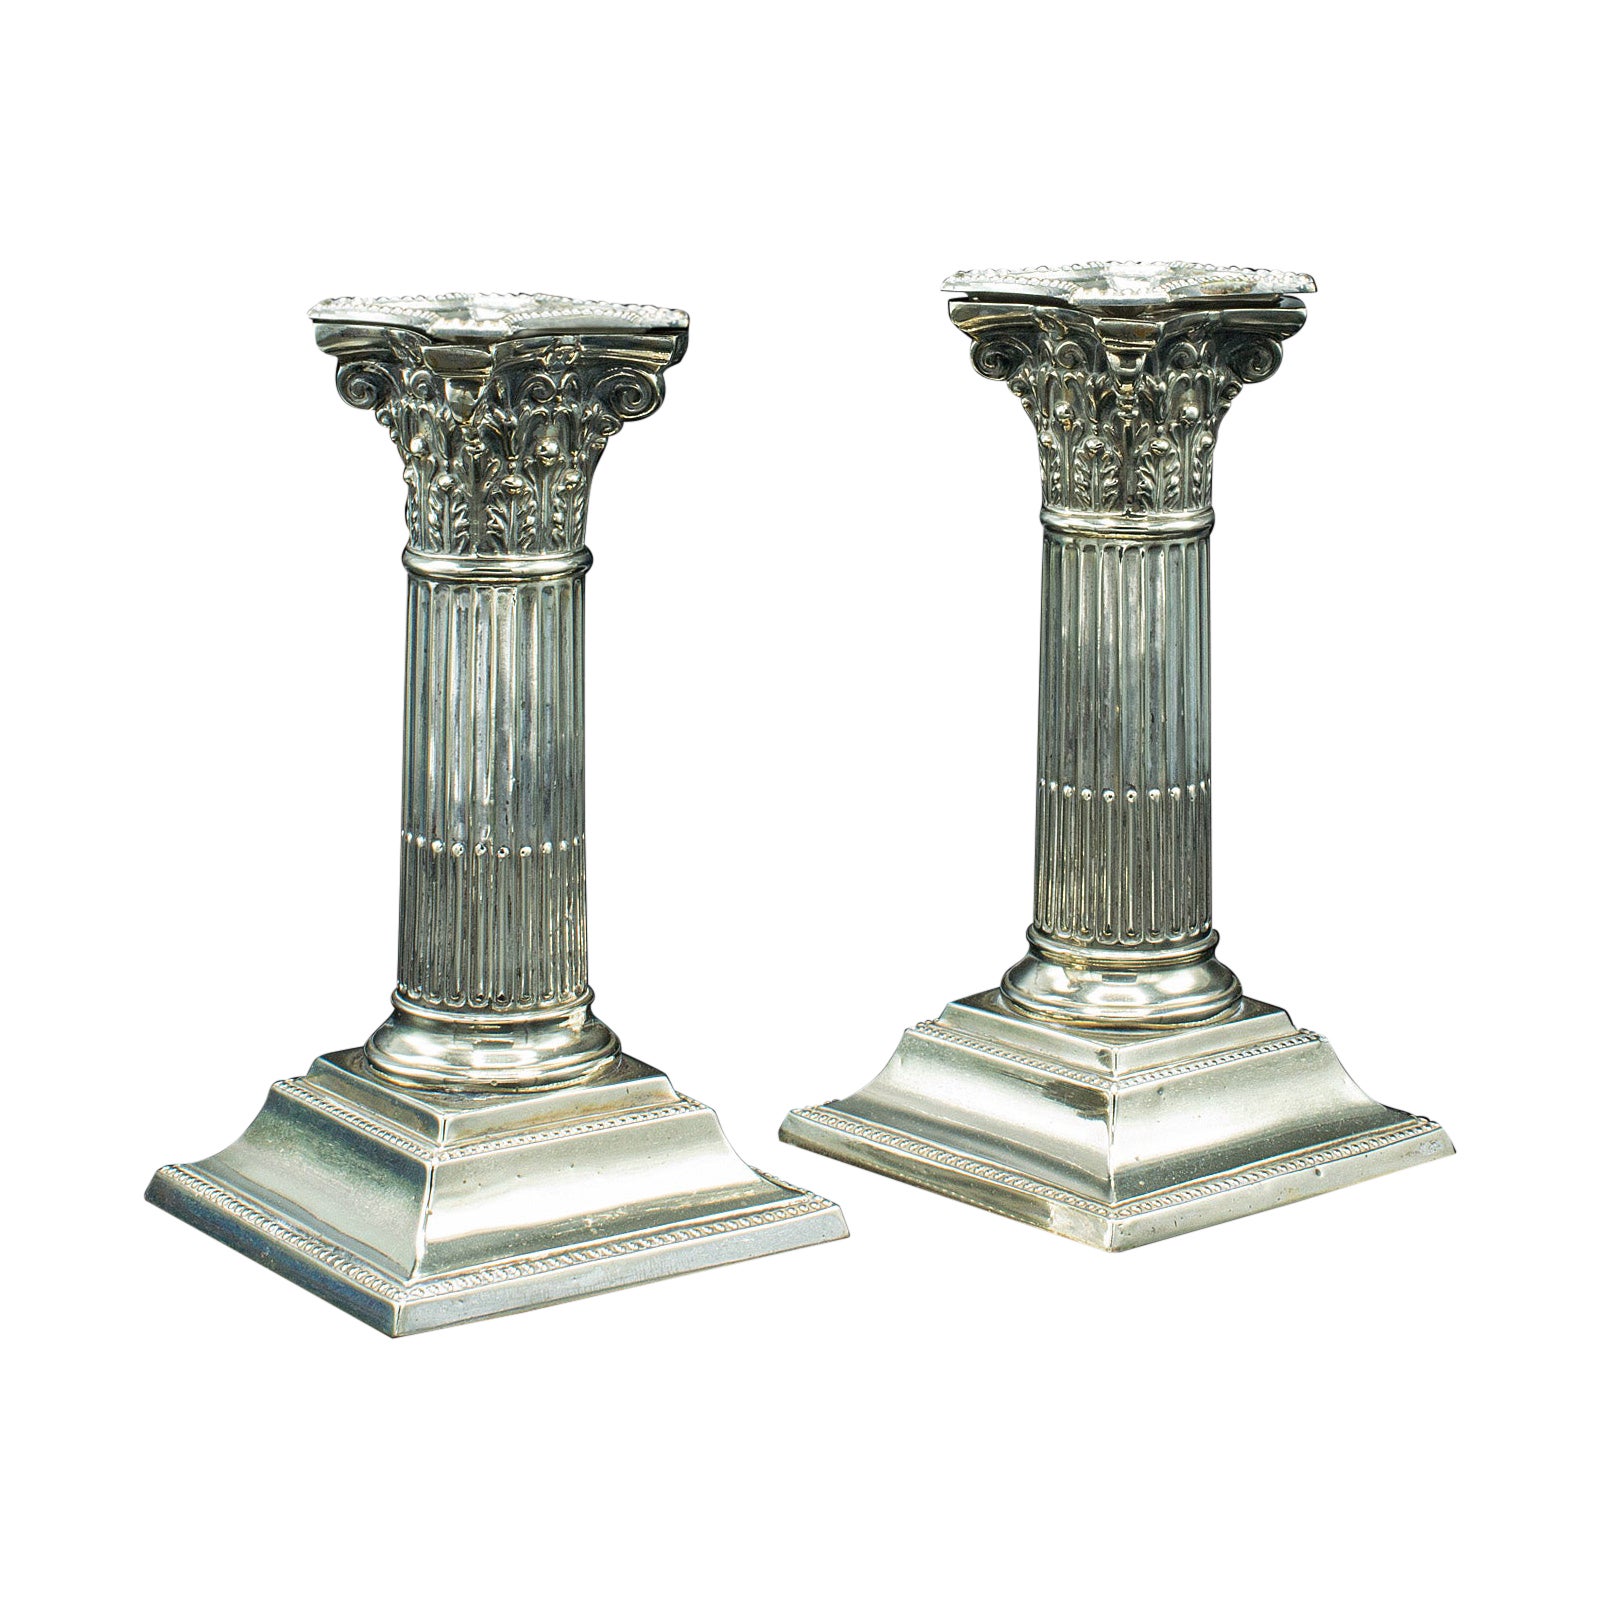 Pair of Antique Decorative Candlesticks, Italian, Silver Plate, Grand Tour, 1860 For Sale